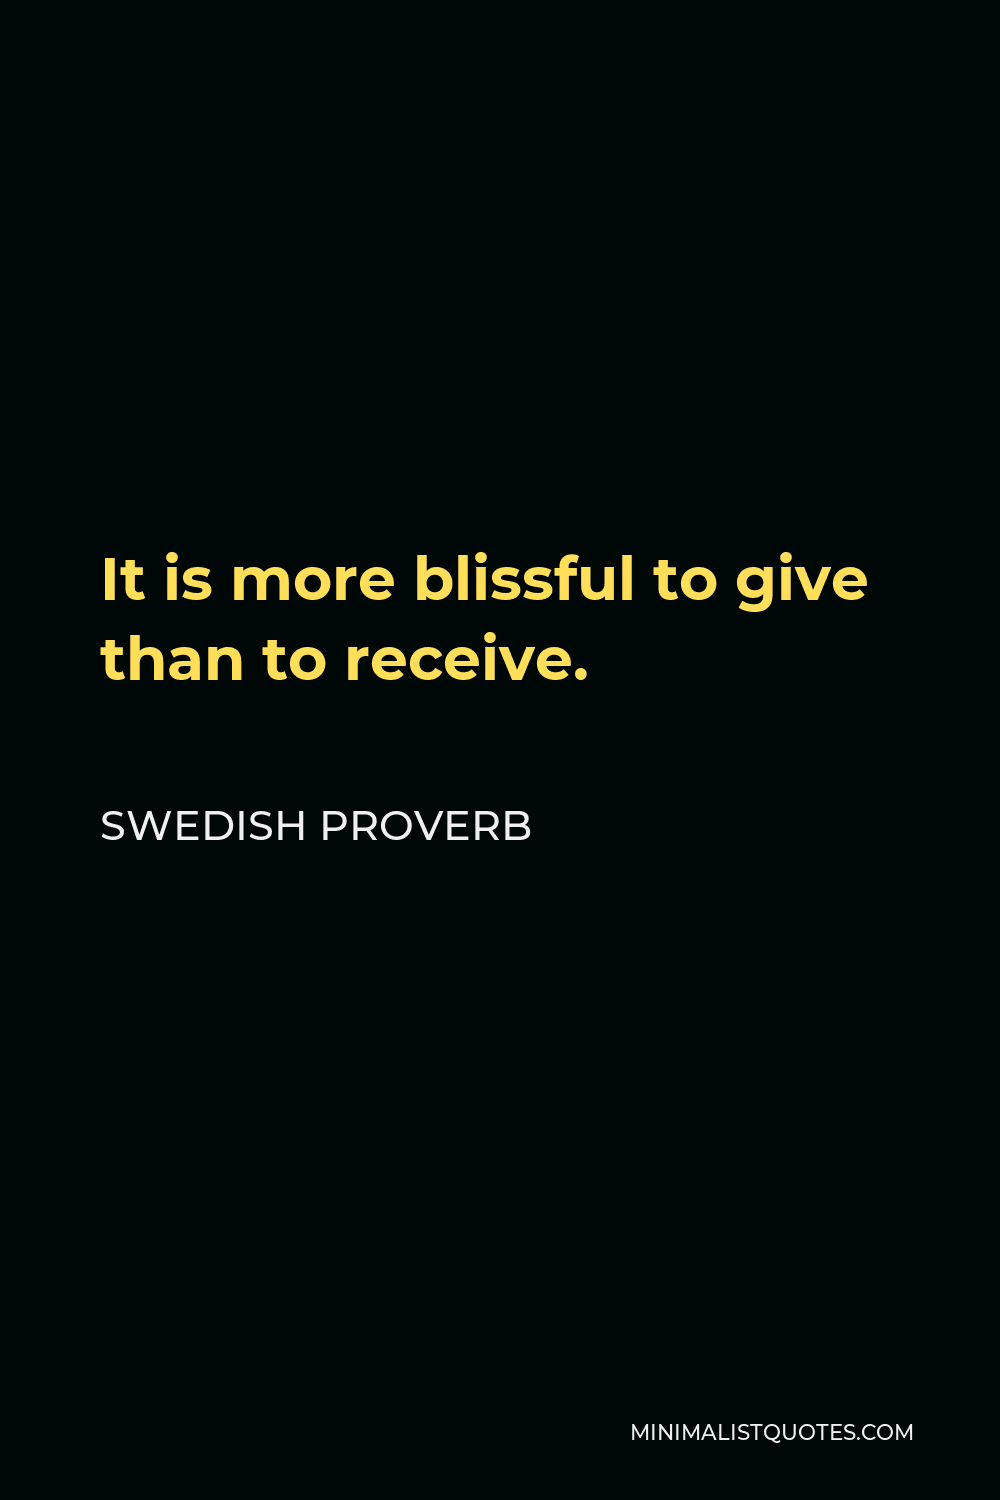 Swedish Proverb Quote - It is more blissful to give than to receive.